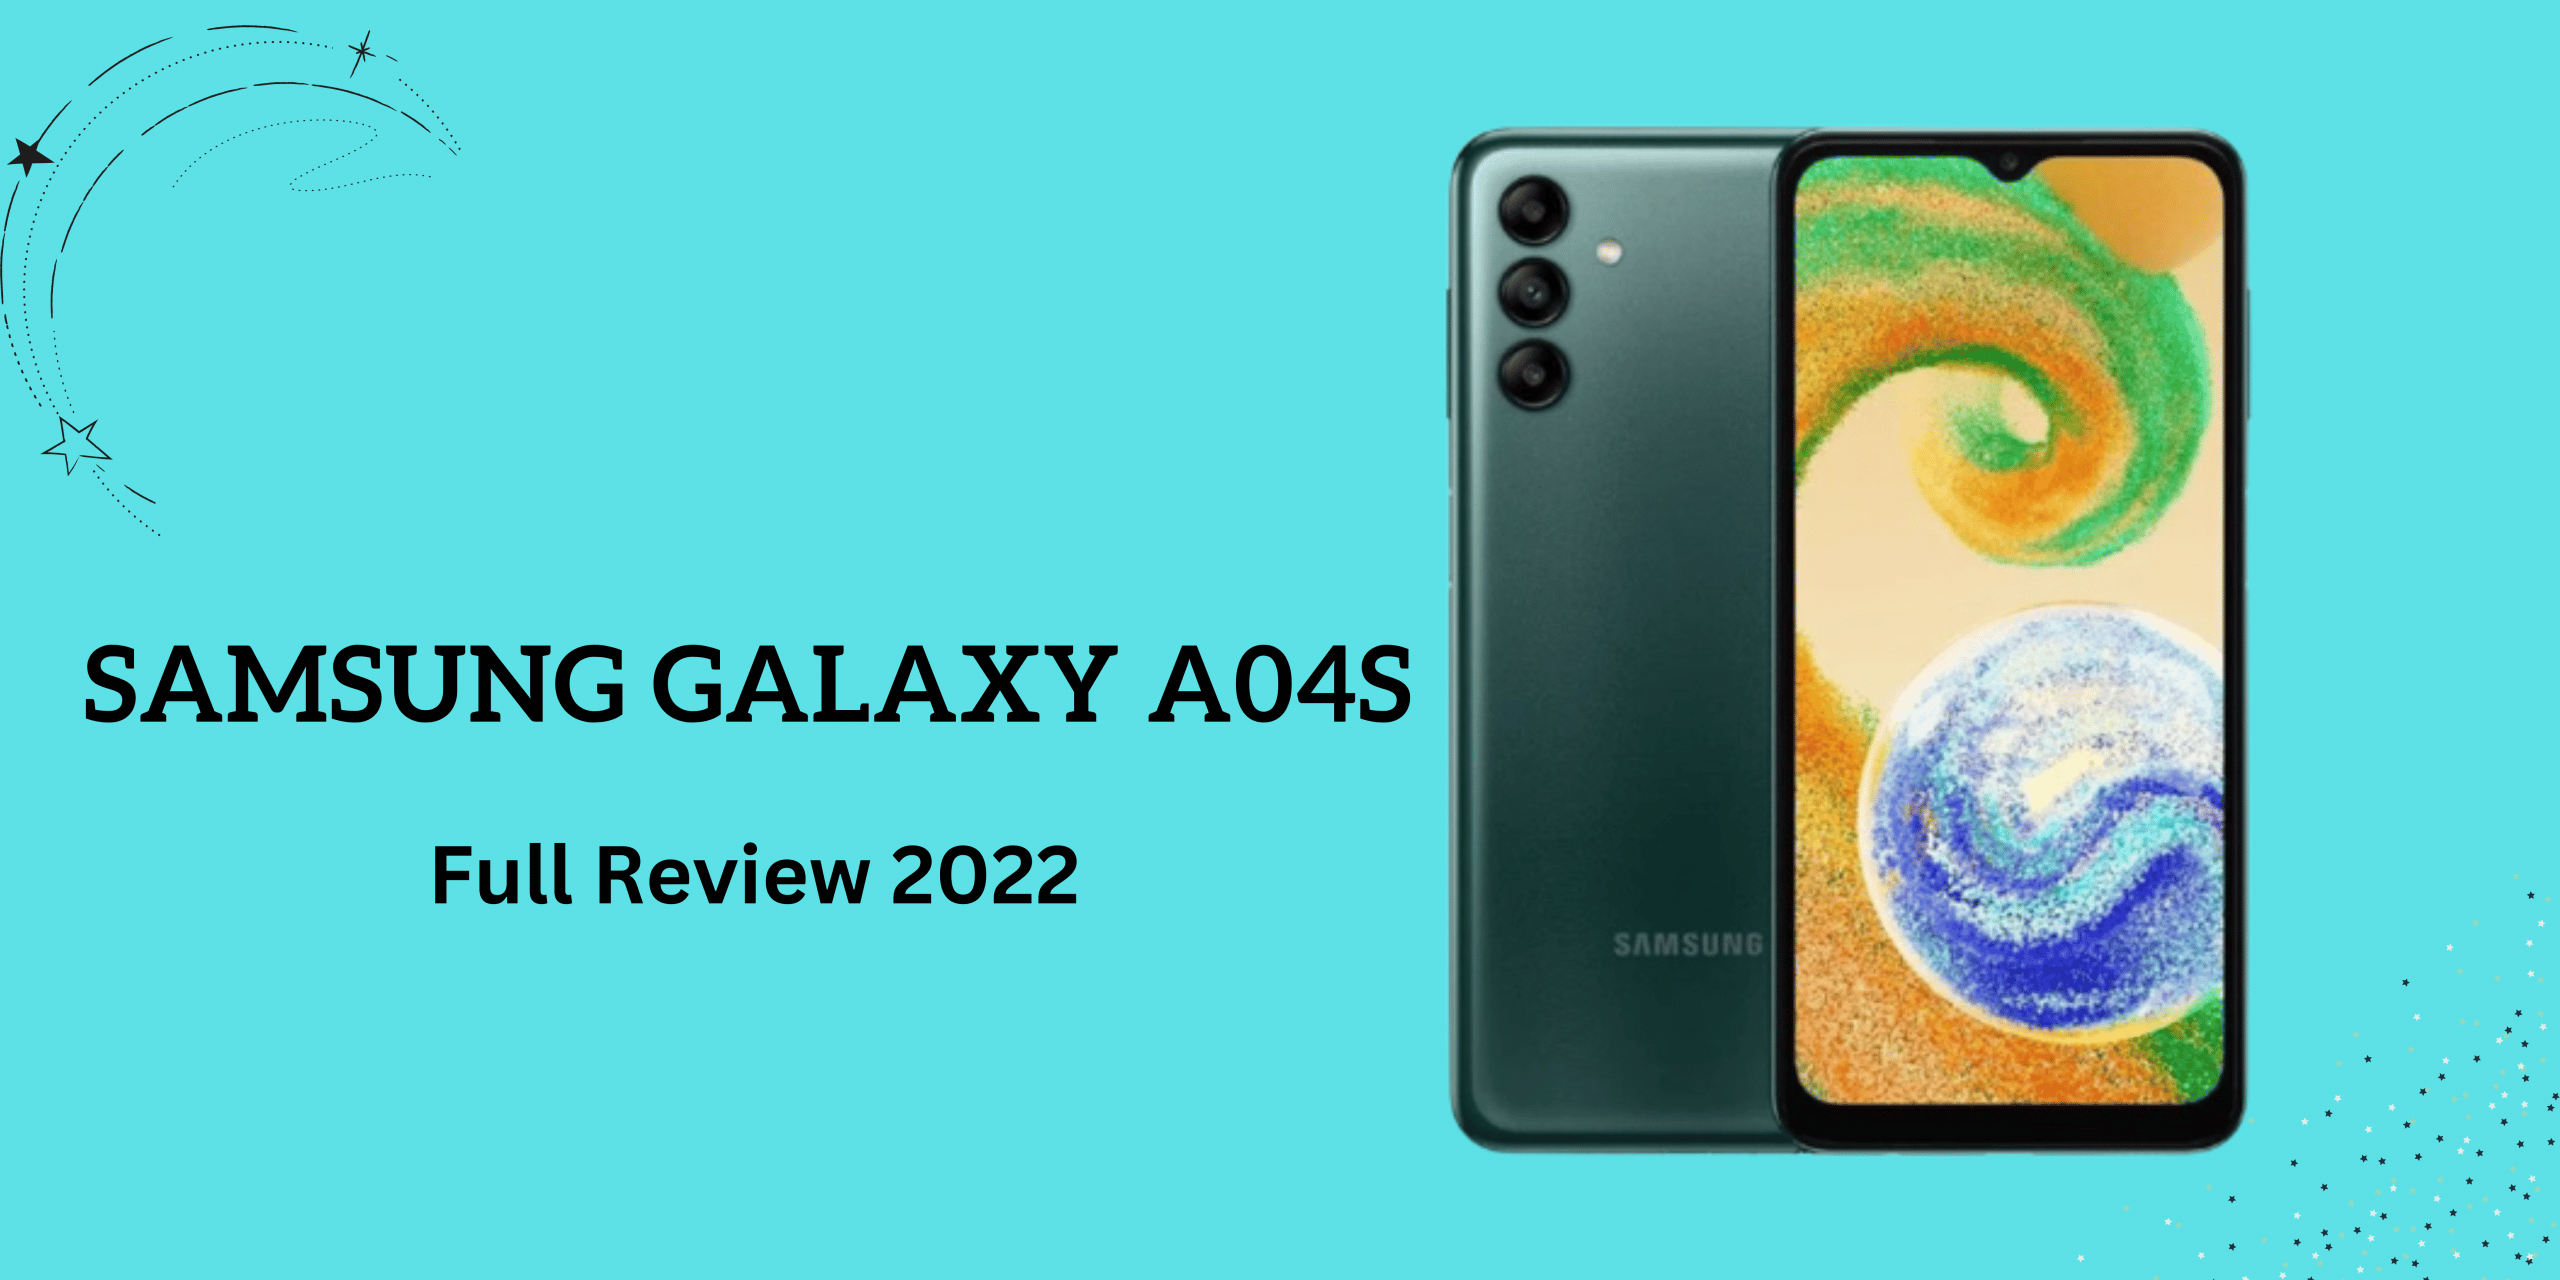 Samsung Galaxy A04s Review 2022